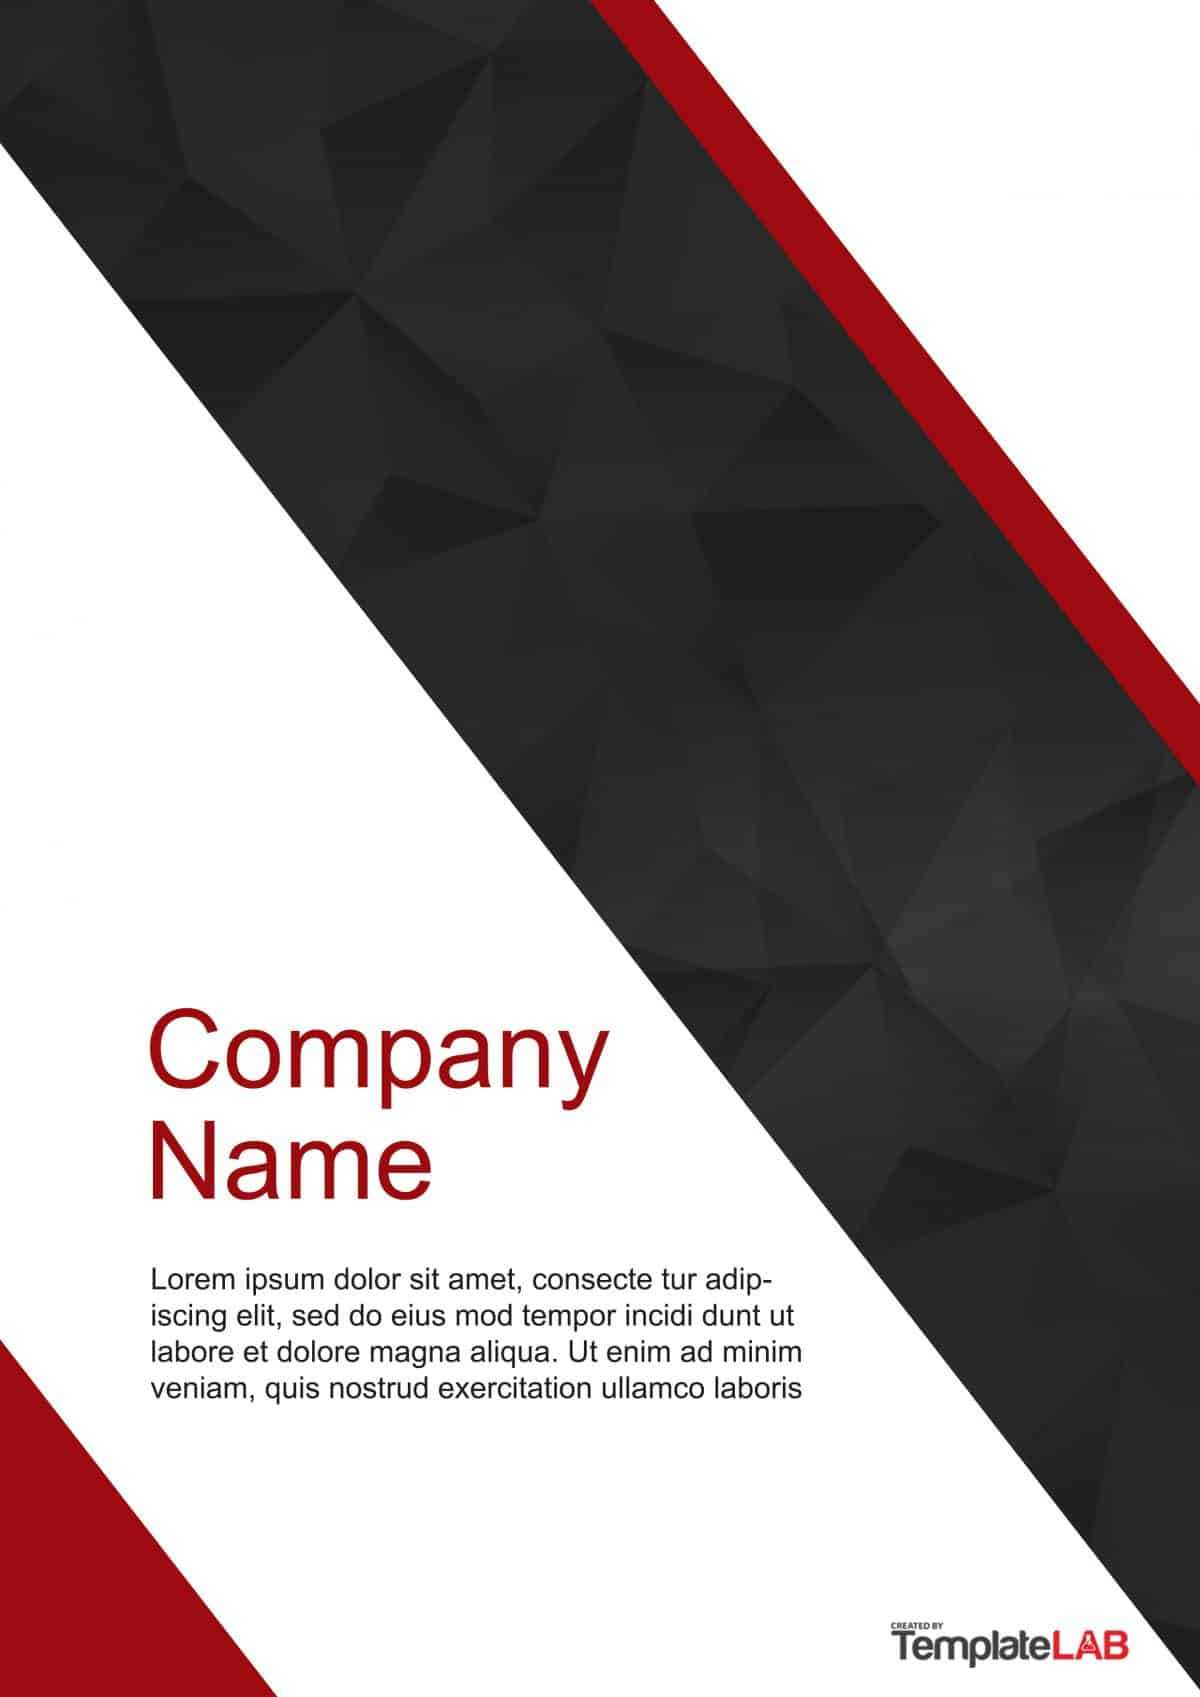 39 Amazing Cover Page Templates (Word + Psd) ᐅ Templatelab Within Report Cover Page Template Word